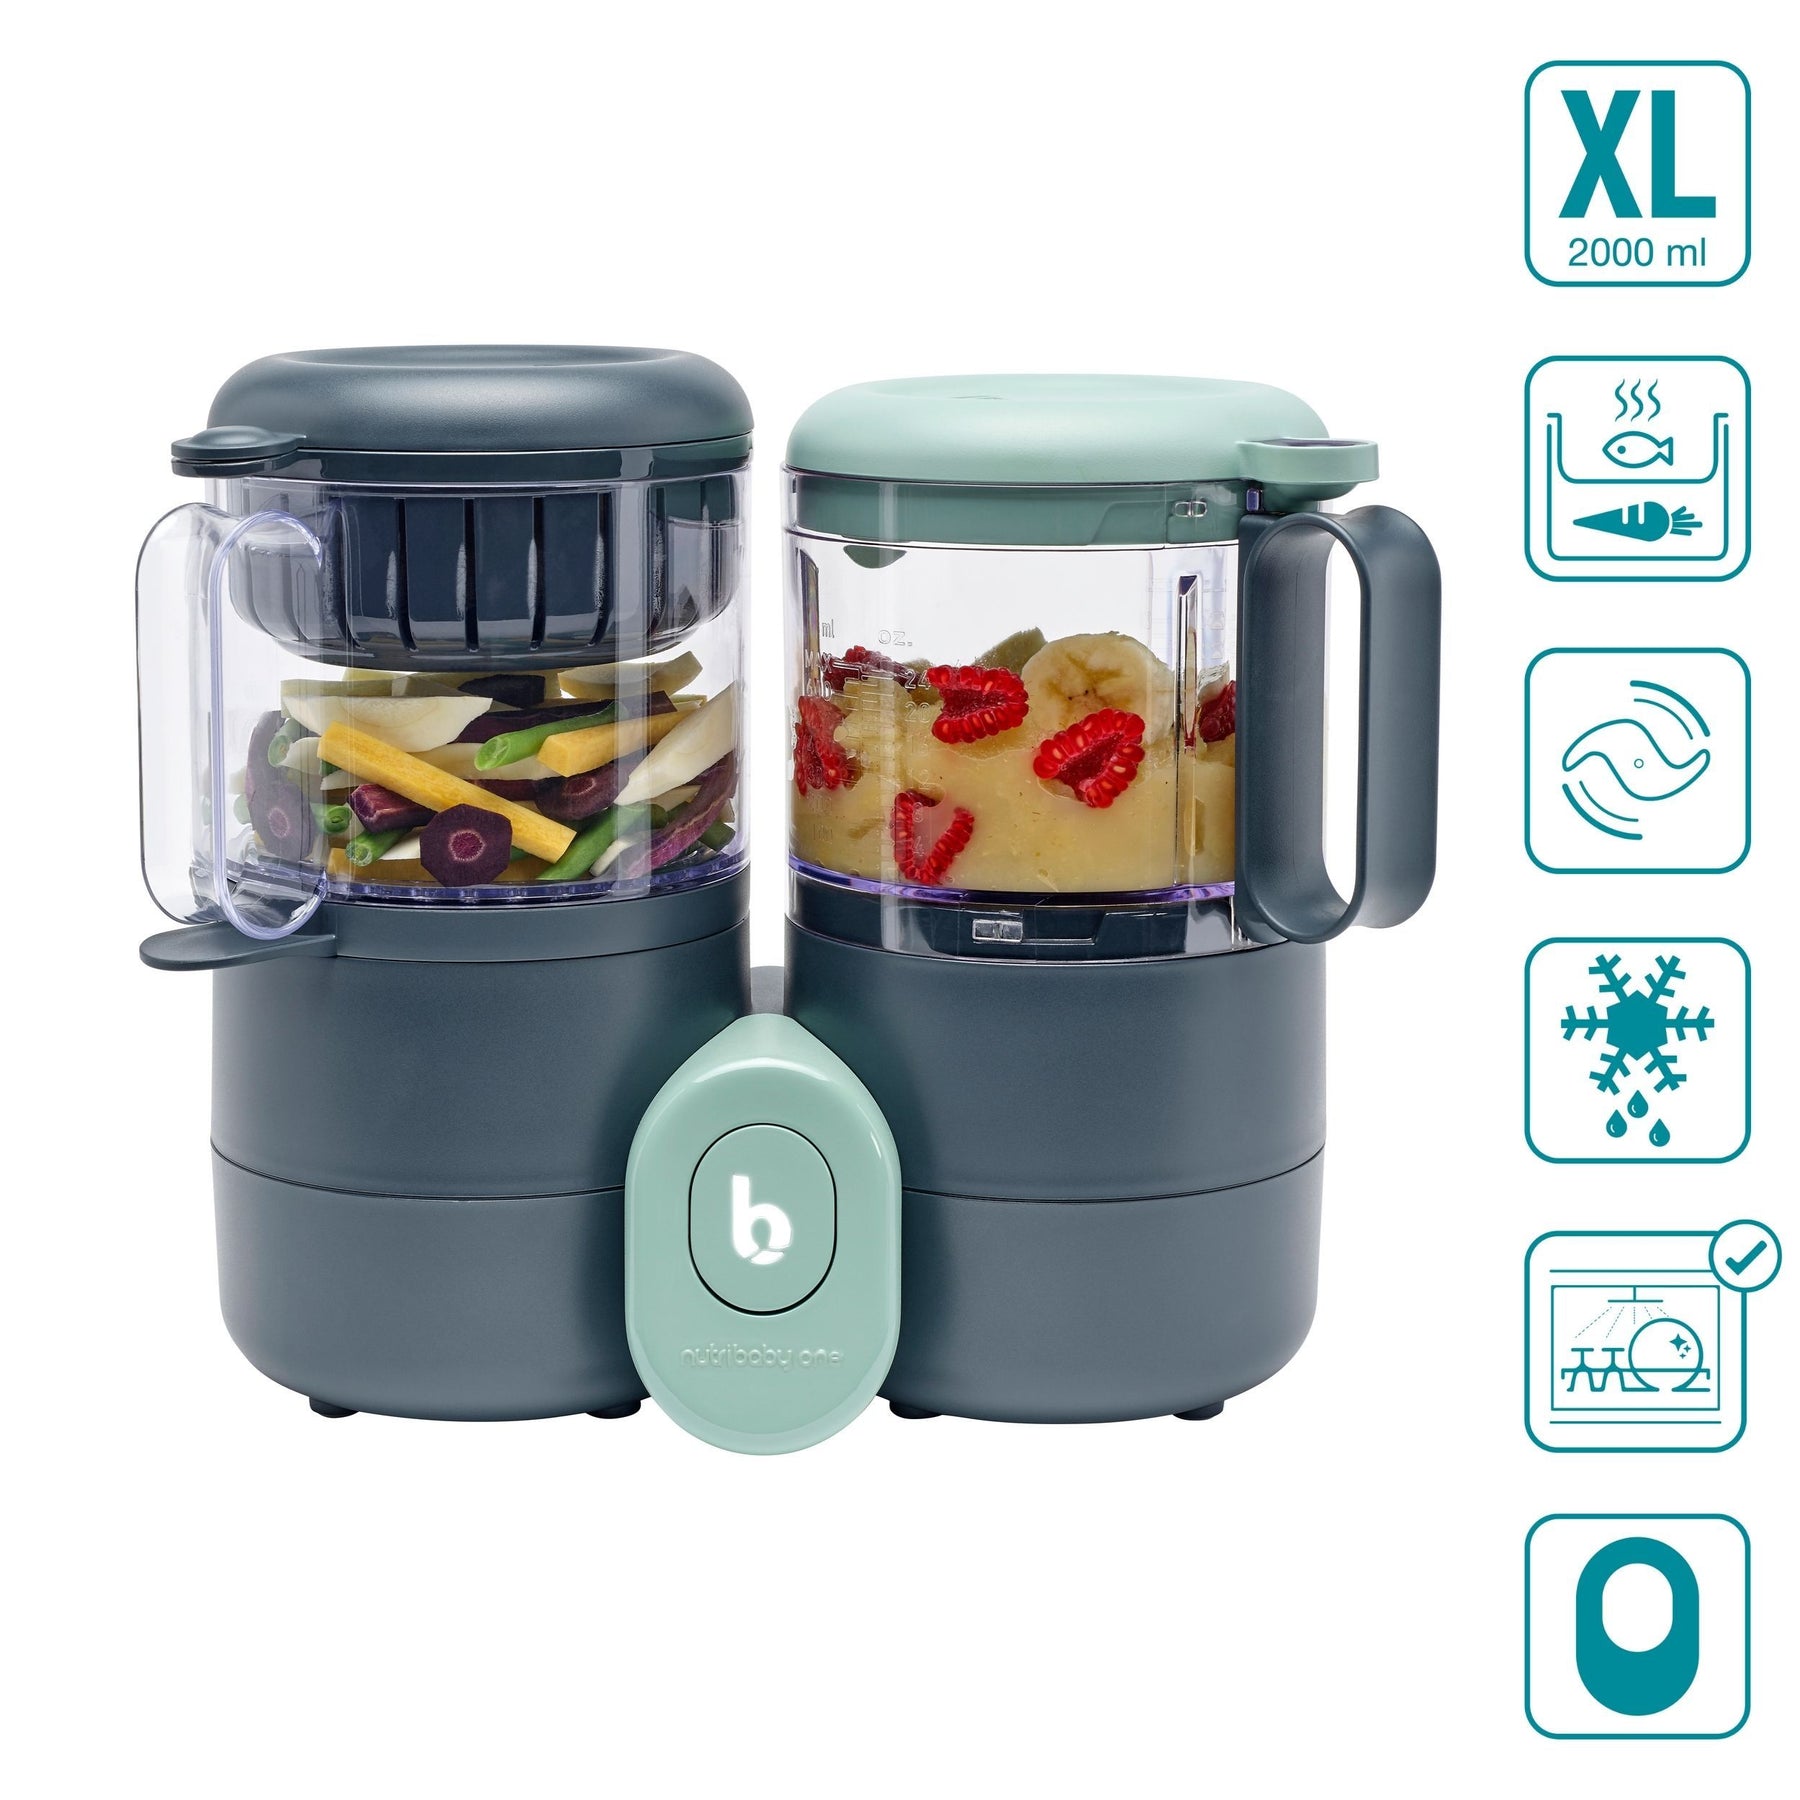 REVIEW - BABYMOOV NUTRIBABY+ XL Baby Food Maker 